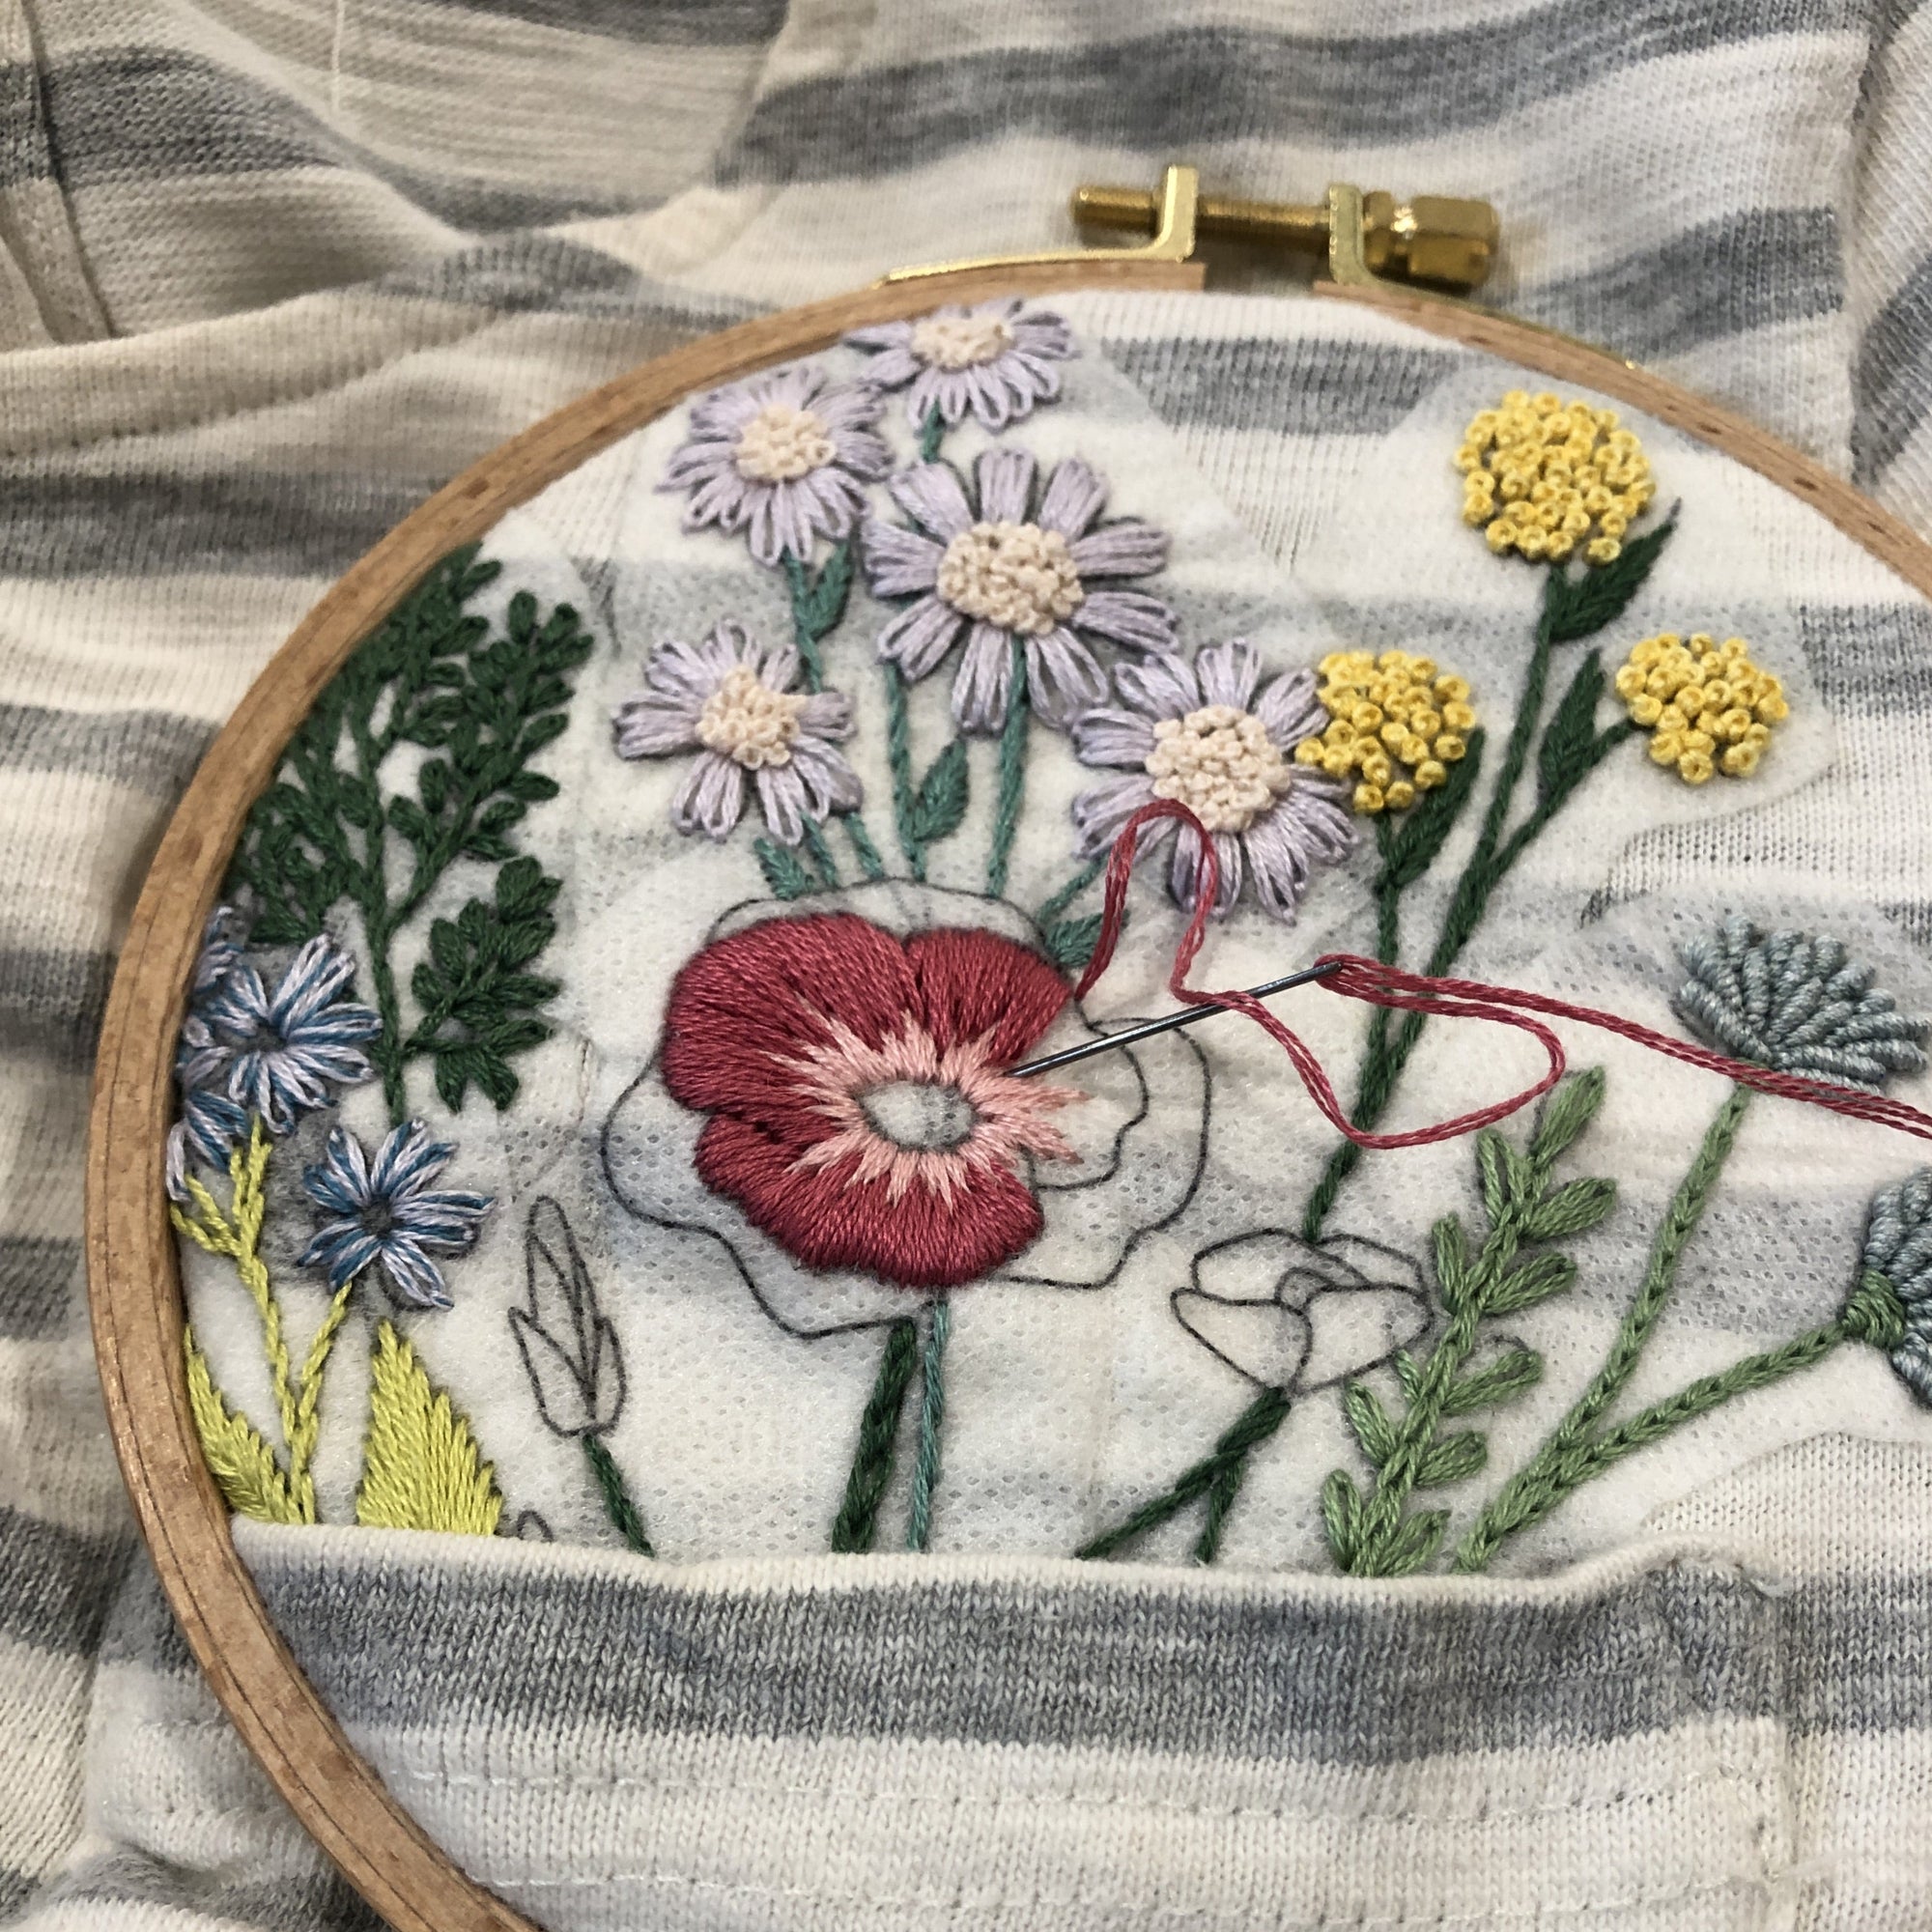 Floral Embroidery Kit, Flowers Cross Stich Kit , Plants Embroidery Pattern,  Beginner Embroidery Kit, Diy Craft Kit, Do It Yourself 